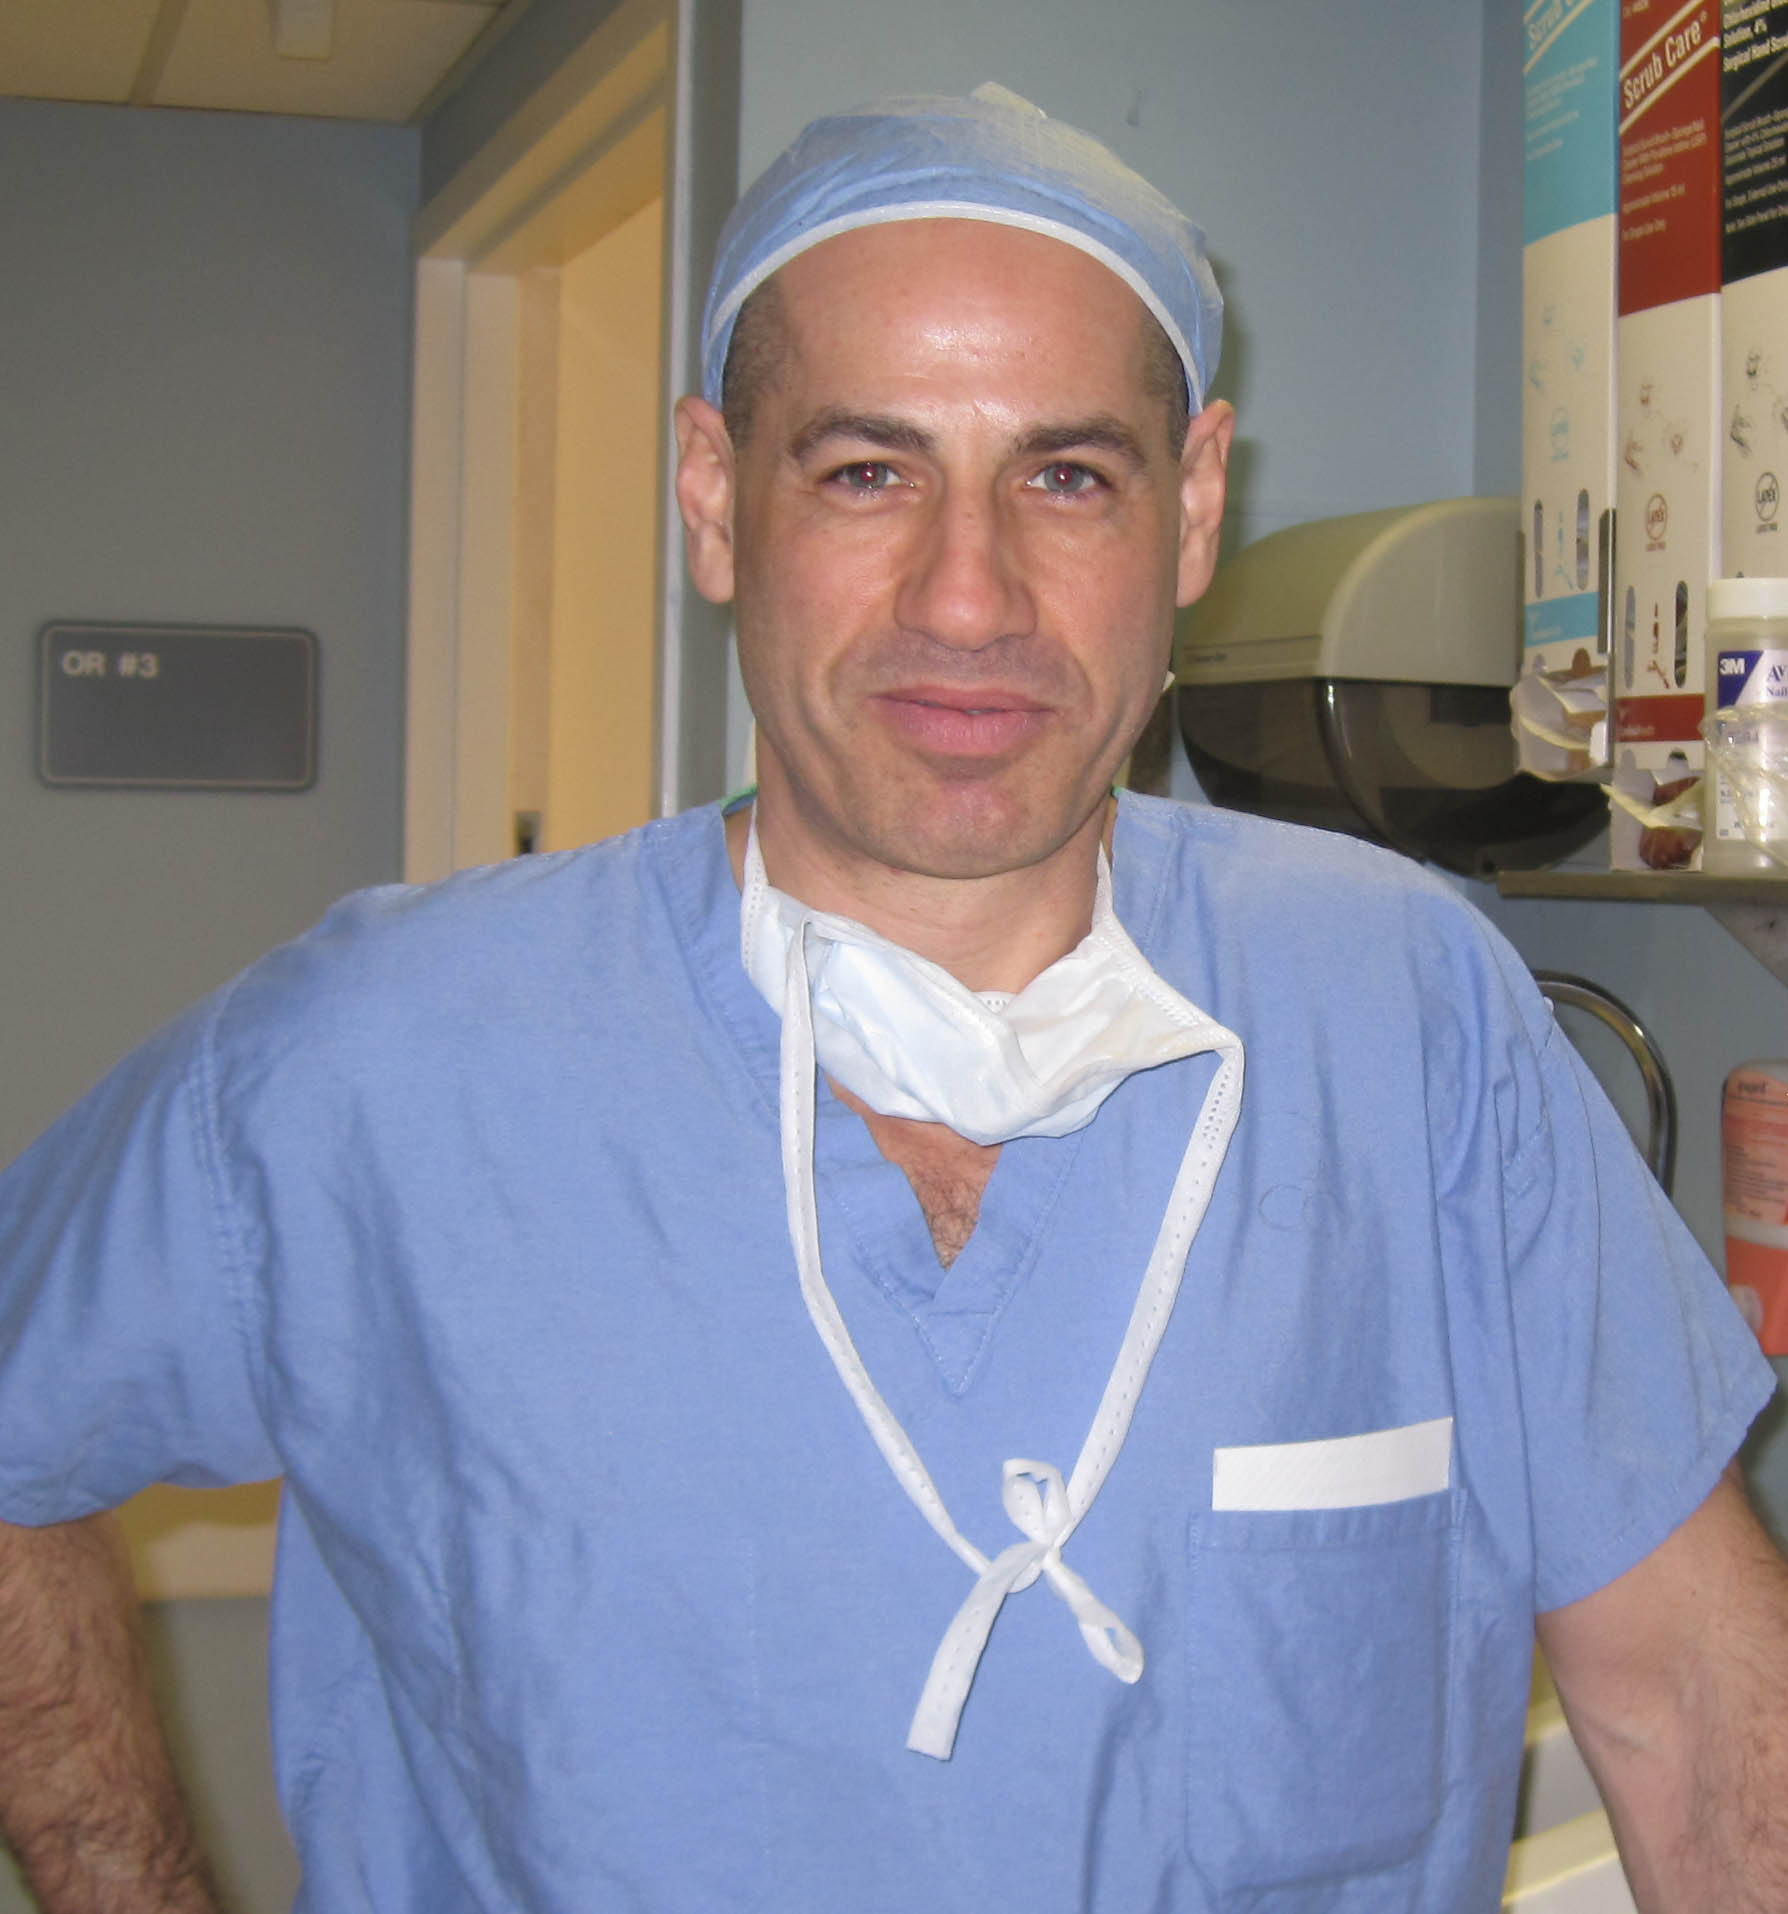 Dr. Lawrence Gordon performs Head and Neck Surgery for ENT Specialty Care in Orange County NY